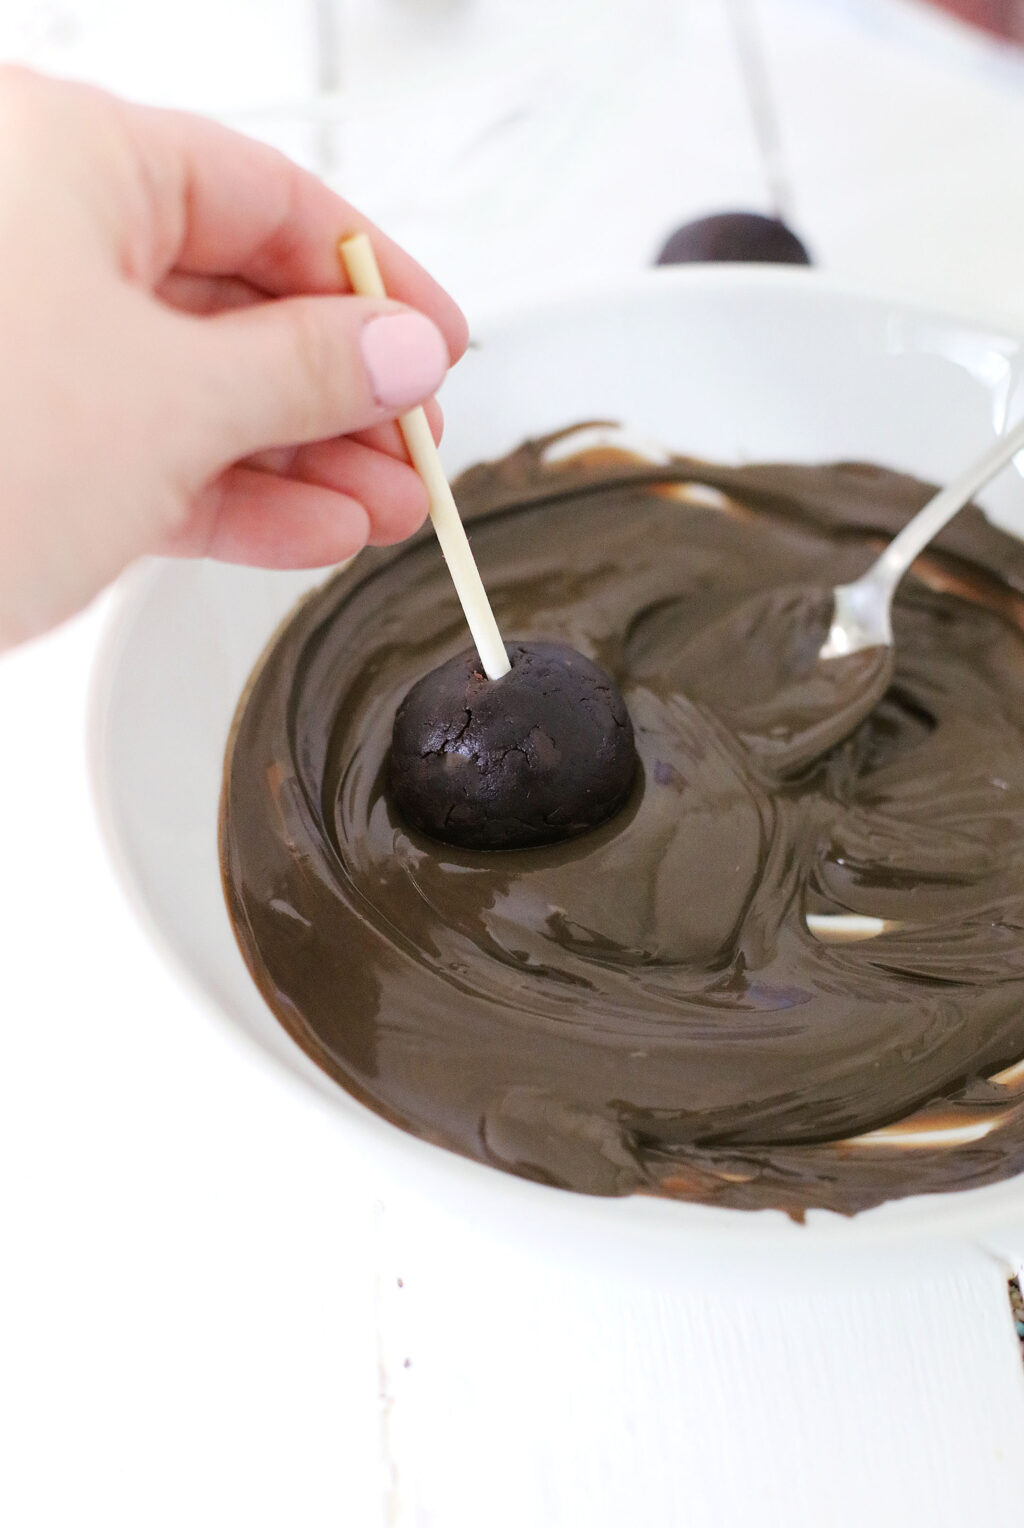 chocolate cake pop being dipped into melted chocolate